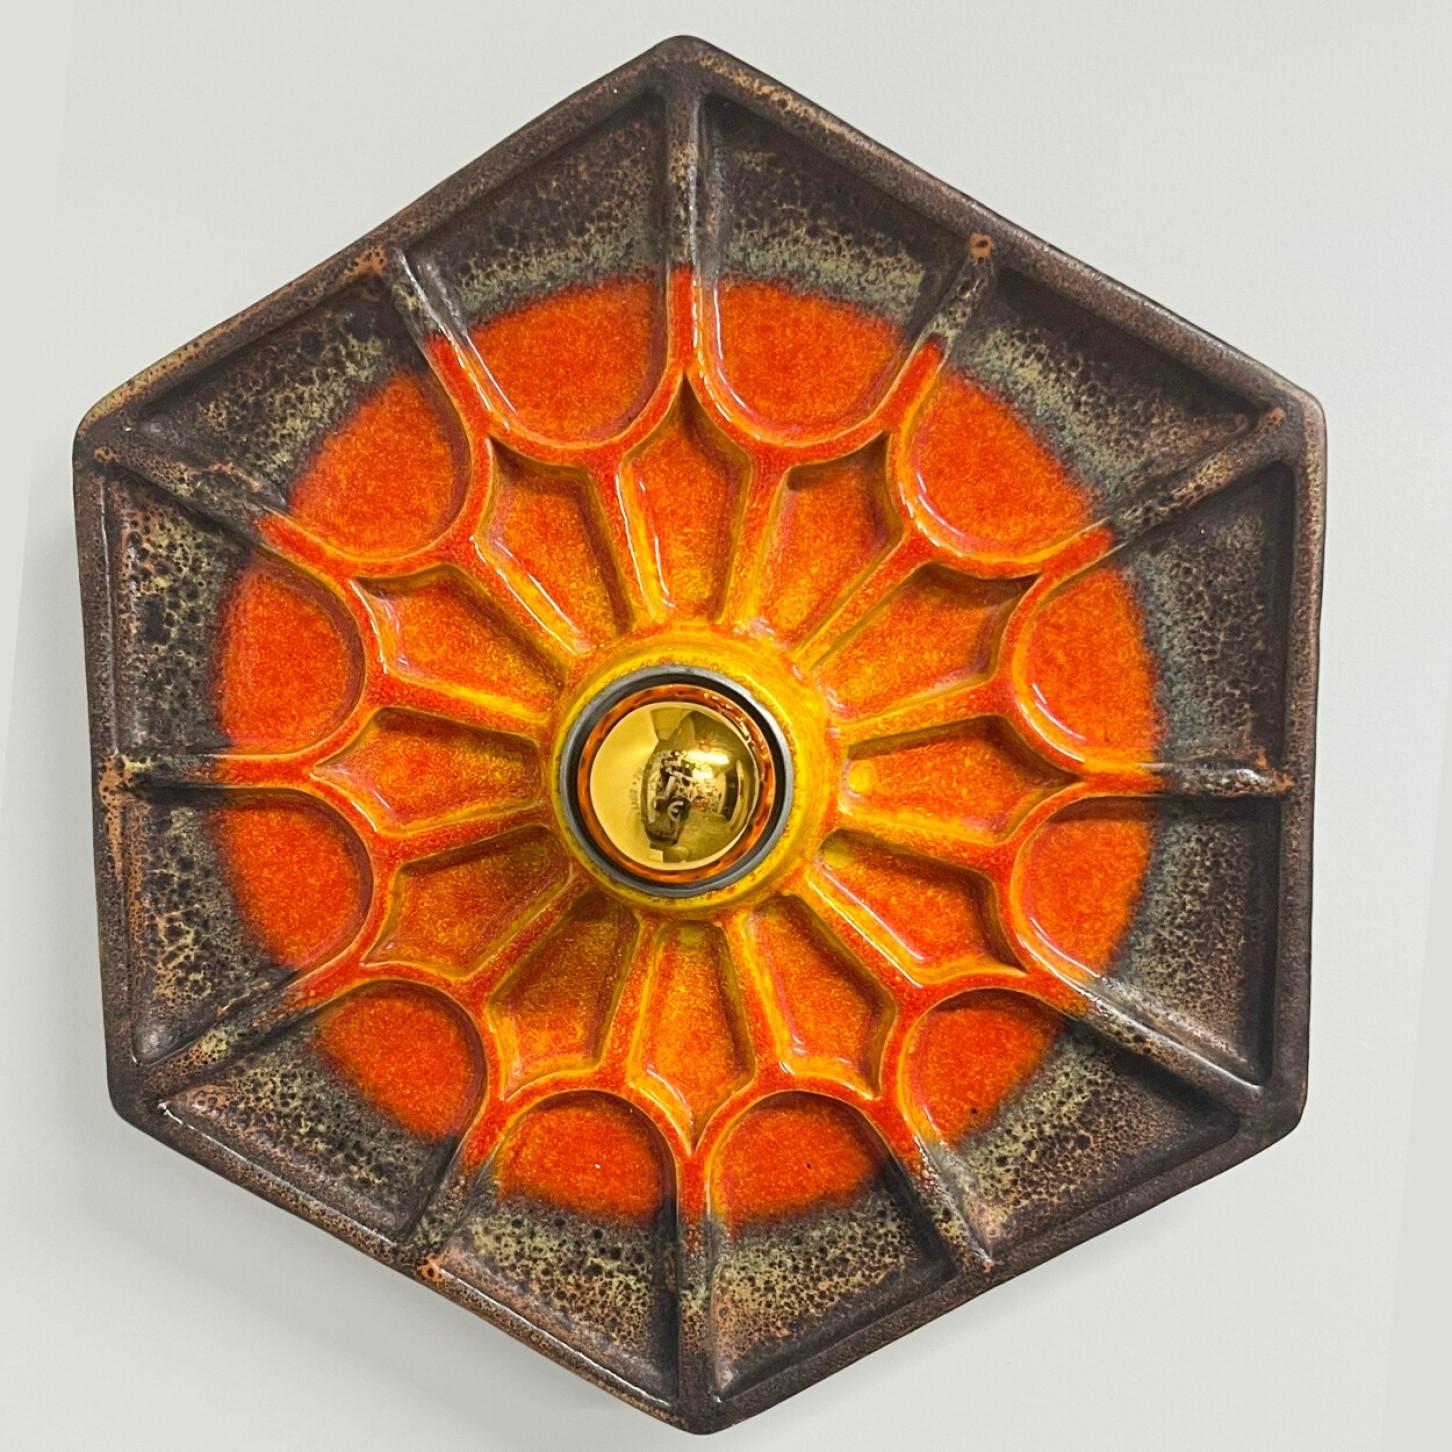 Glazed Pair of Orange Hex-shaped Ceramic Wall Lights, Germany, 1970 For Sale